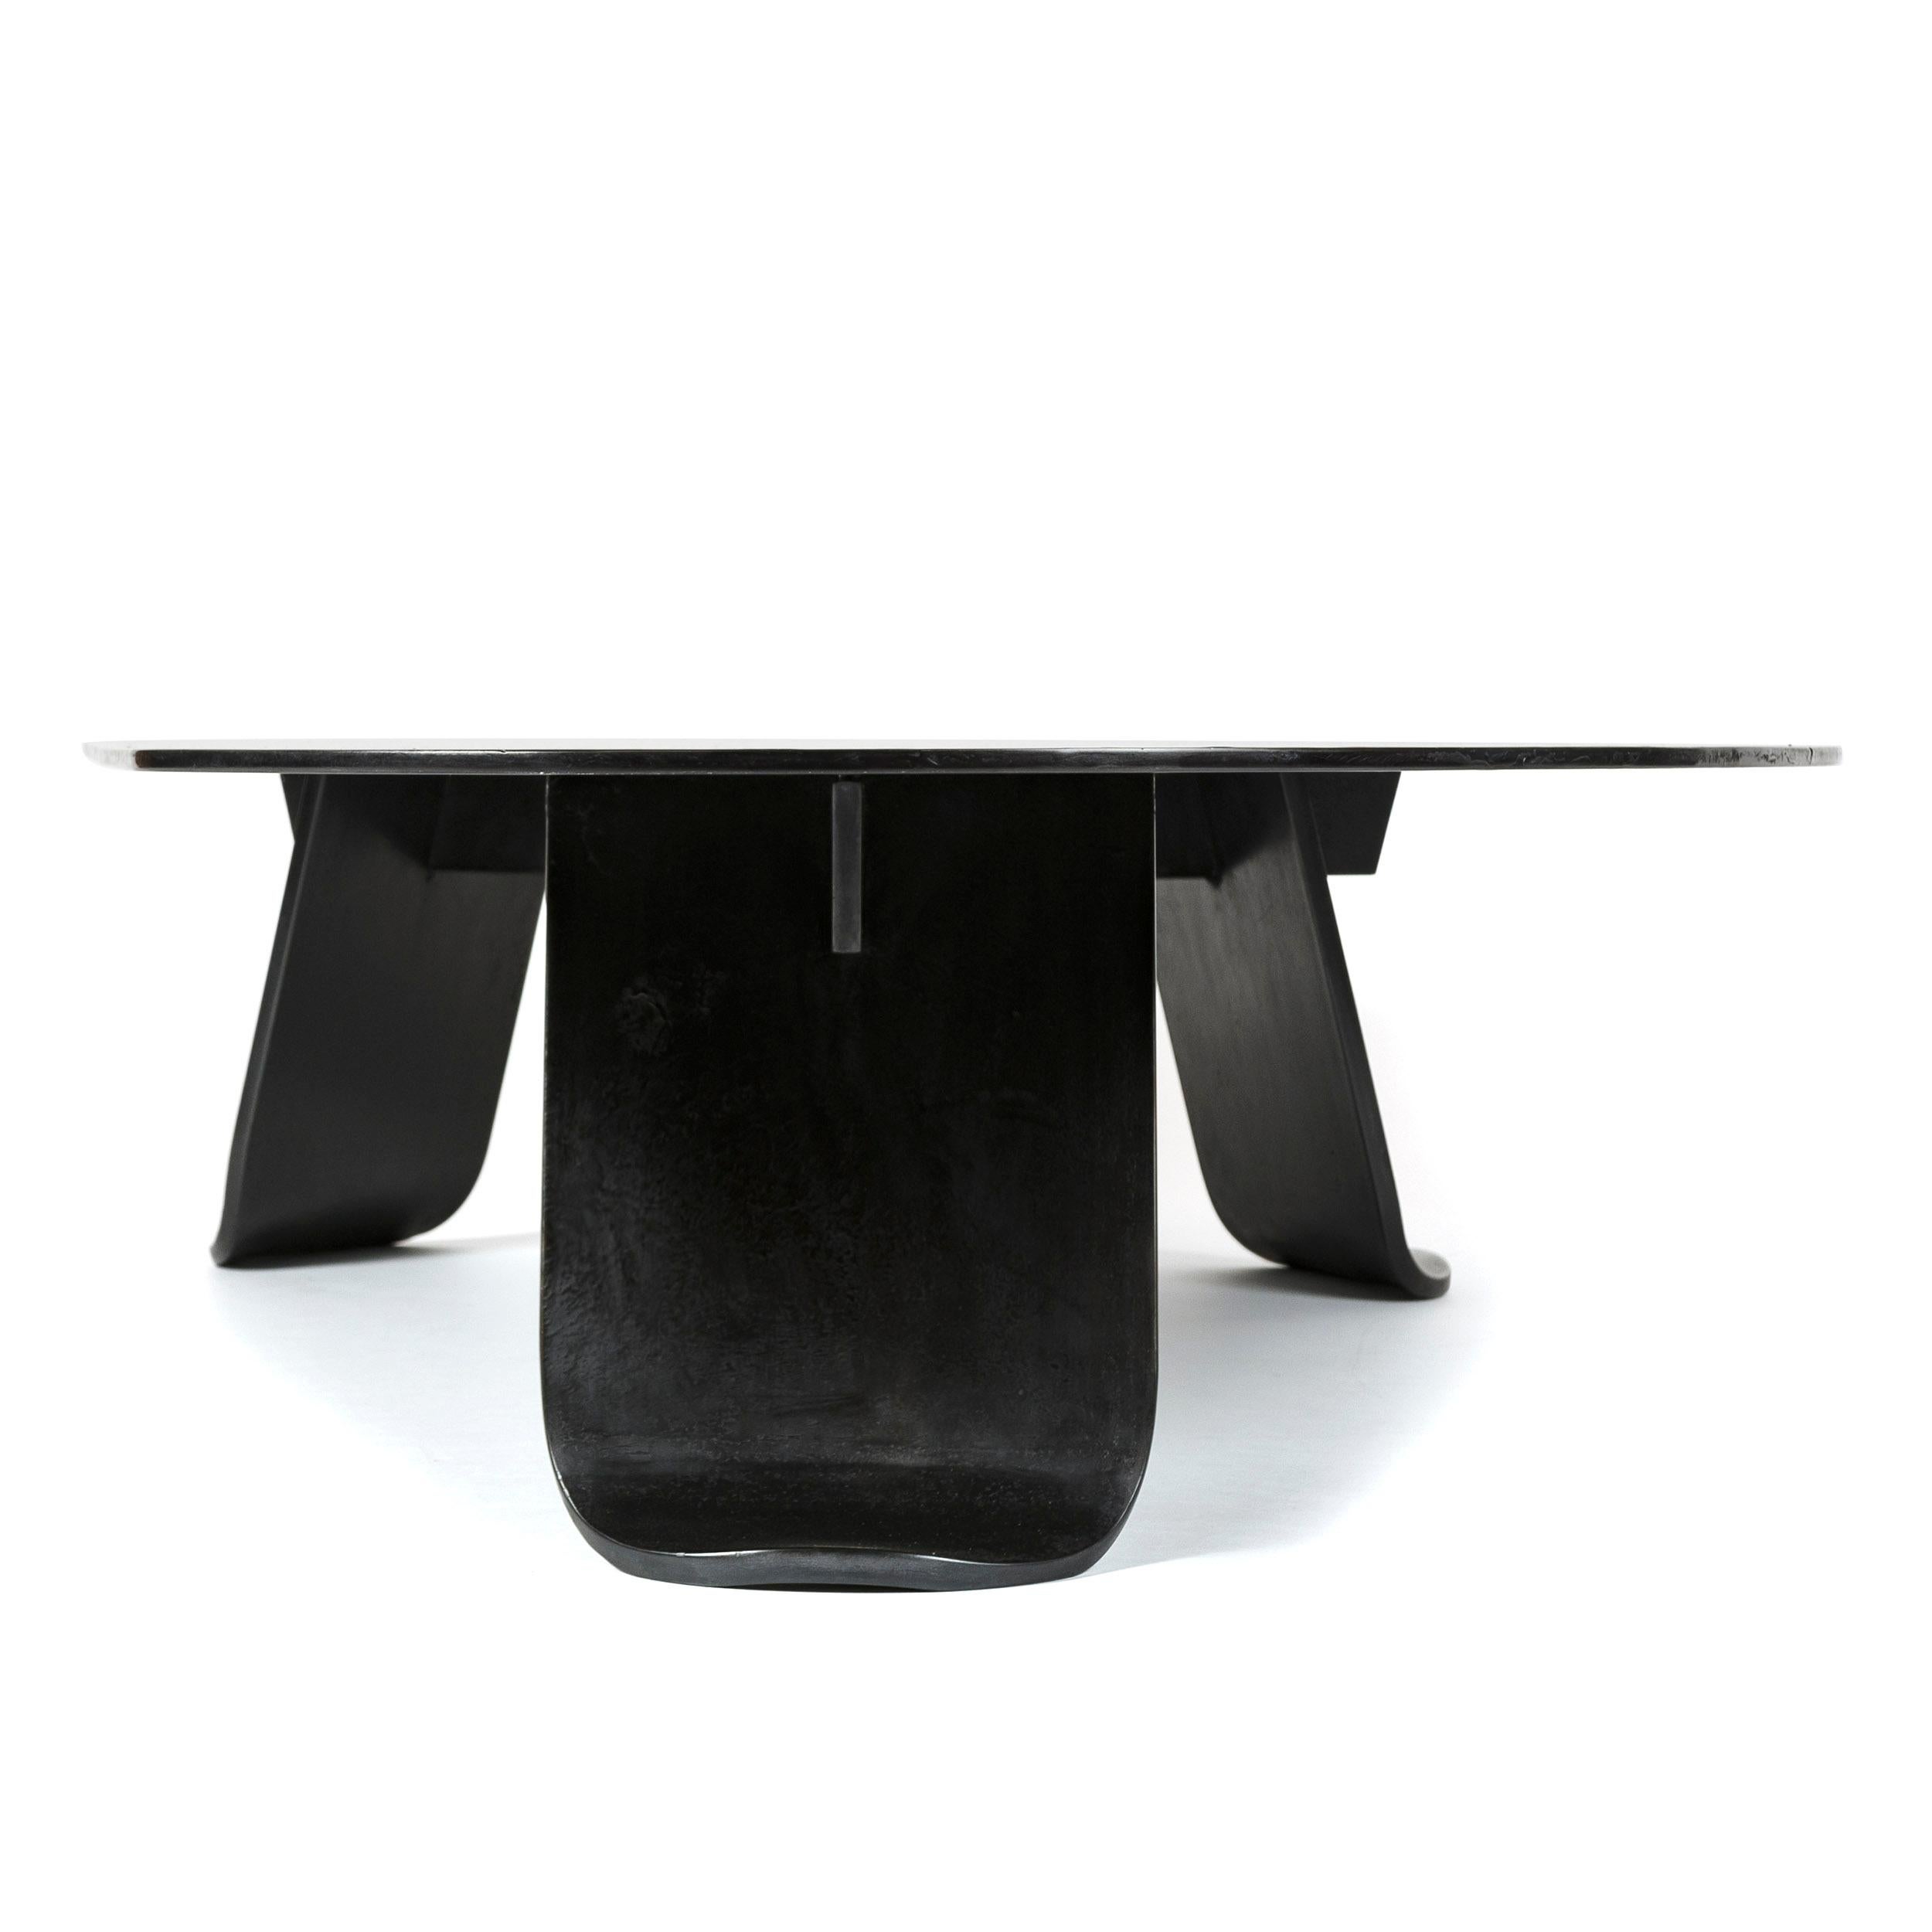 WYETH Chrysalis Table No. 1 in Patinated Steel with Hot Zinc Finish For Sale 2